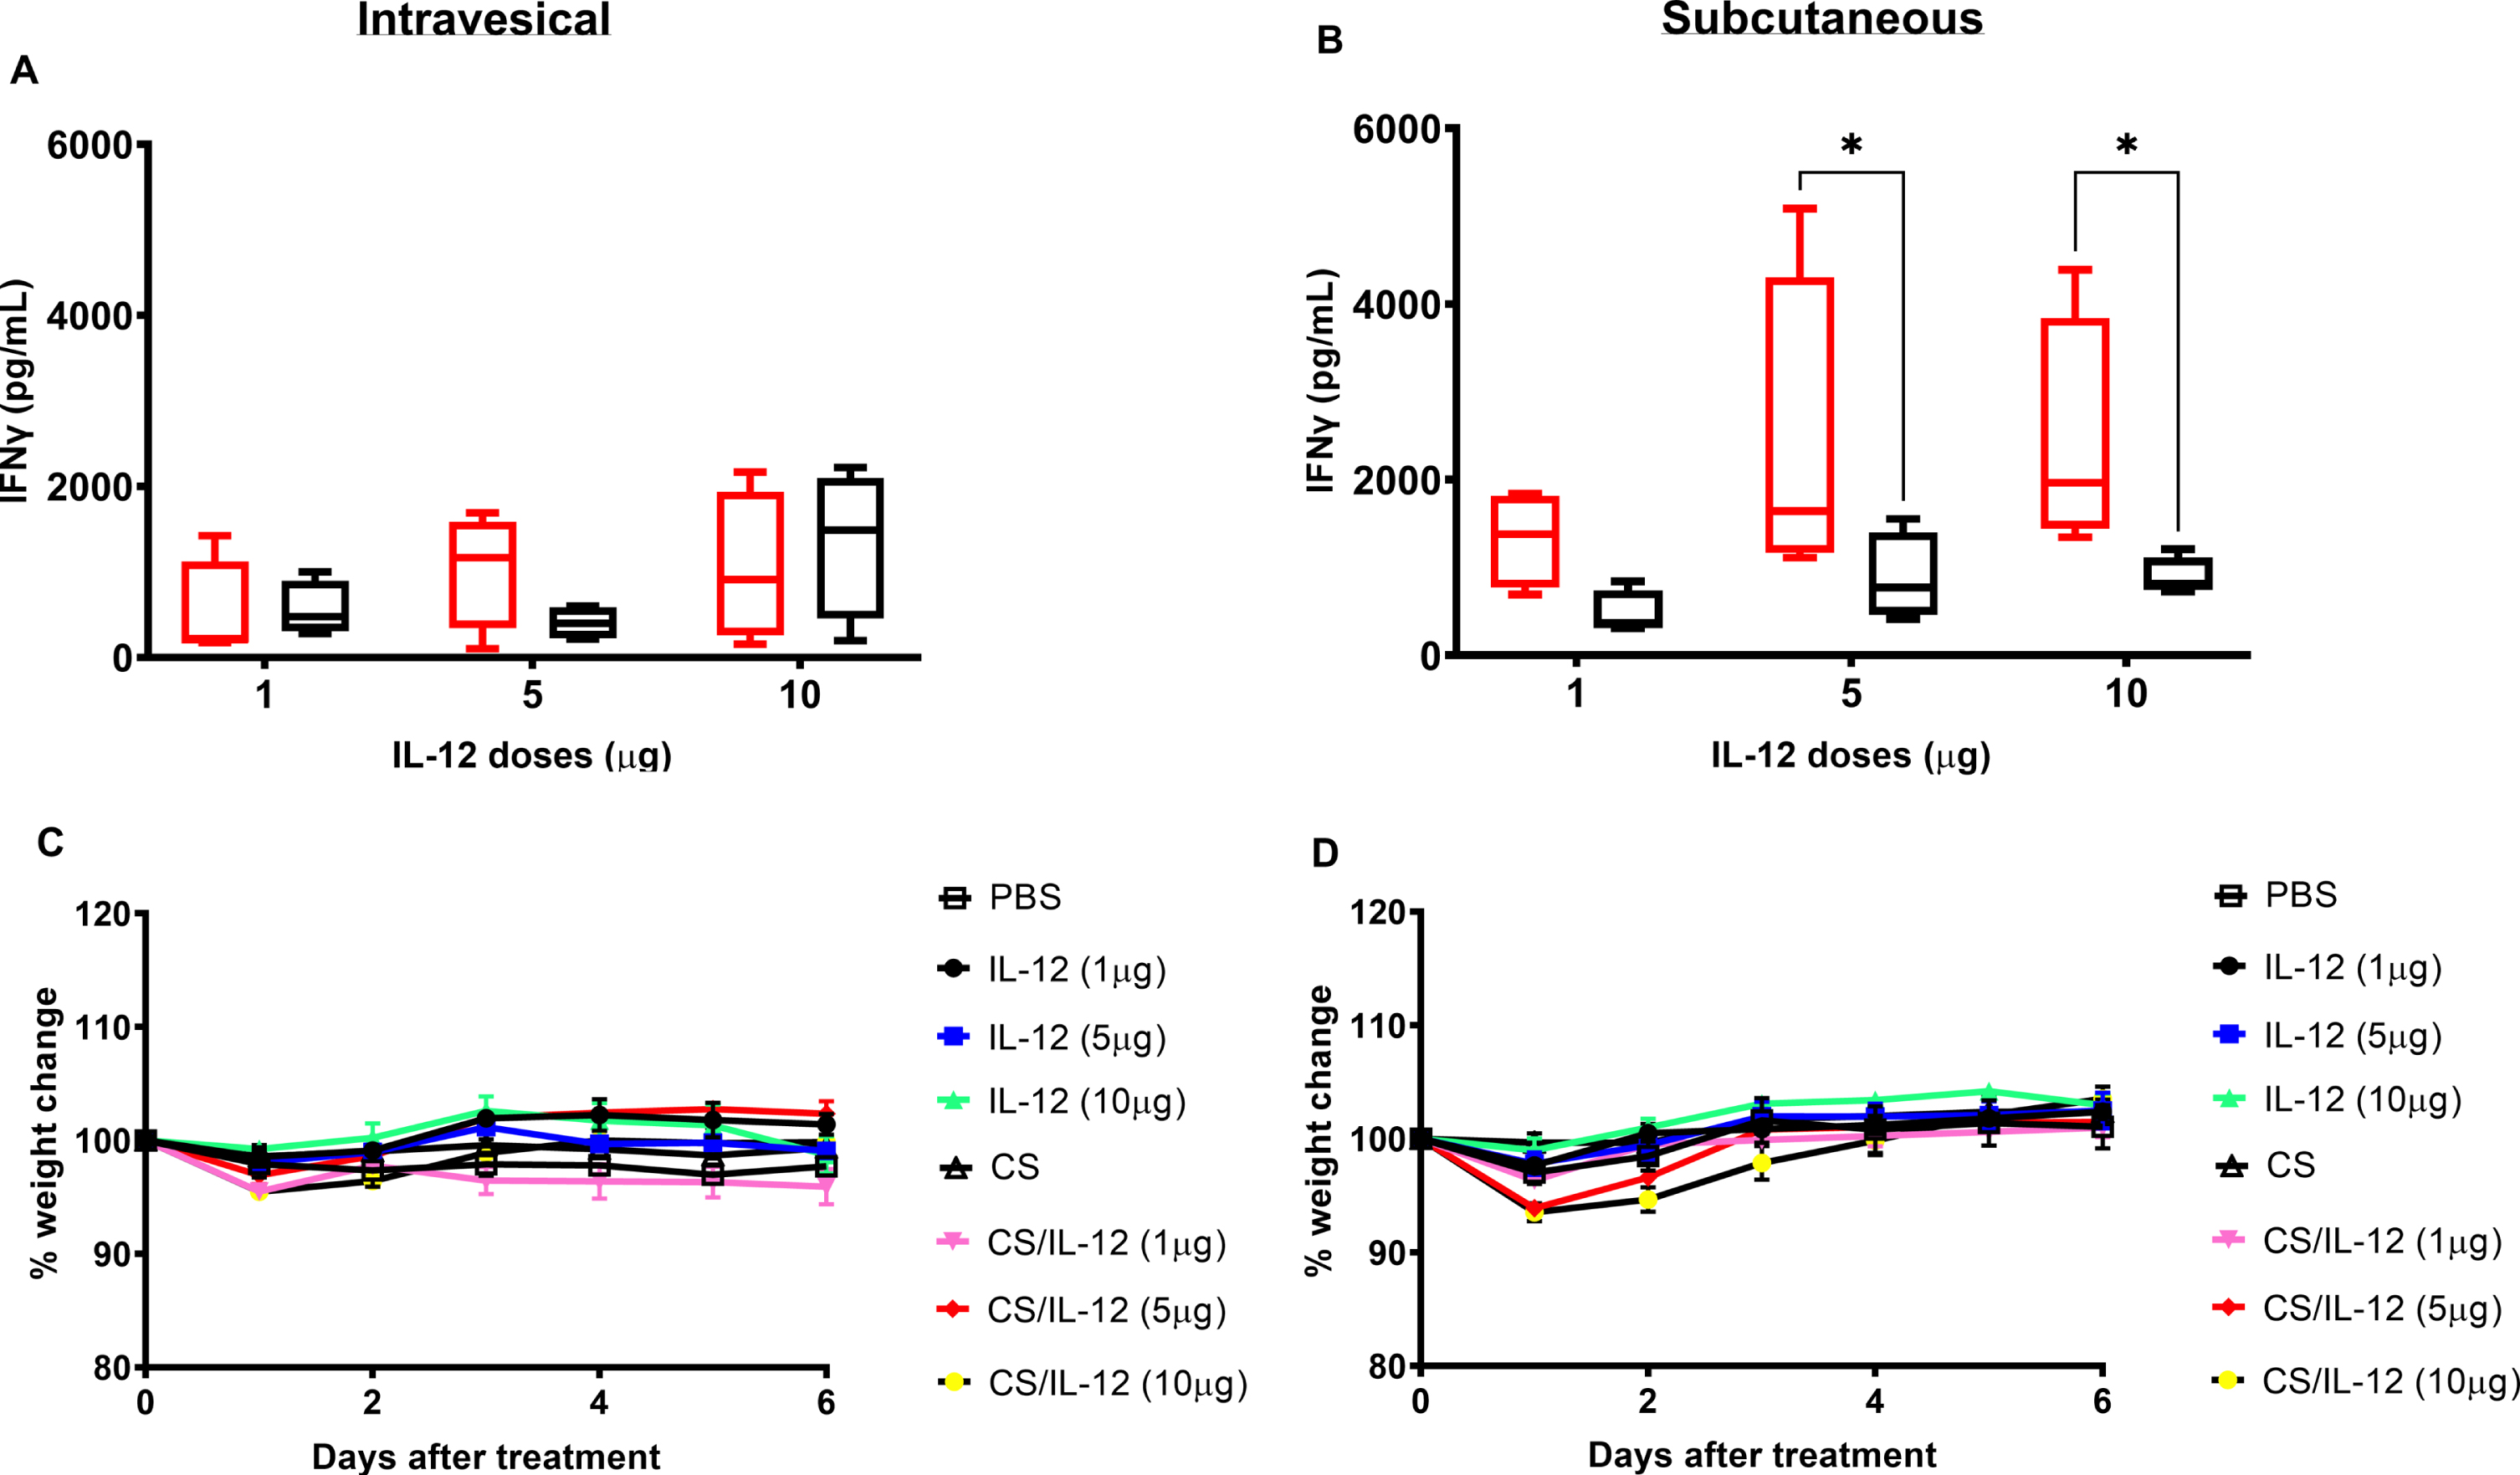 Dose escalations of intravesical IL-12 and chitosan are well-tolerated. Mice were treated intravesically or subcutaneously by multiple doses of IL-12 (1μg IL-12/mouse, 5μg IL-12/mouse, or 10μg IL-12/mouse) without or with the presence of 1%CS (red bars or black bars, respectively). Sera were obtained using facial vein bleeding at 24 h after administrations. The serum releases of IFN-γ in responses to intravesical or subcutaneous treatments of CS/IL-12 (A) and intravesical or subcutaneous treatments of IL-12 (B) were measured via ELISA. Asterisks indicate a significant difference of IFNγ levels in responses to IL-12 or CS/IL-12 treatments (*, p < 0.05 via two-way ANOVA). Mouse bodyweights in responding to intravesical treatments of IL-12 and CS/IL-12 (C) or subcutaneous treatments of IL-12 and CS/IL-12 (D) were monitored every day in a period of 6 days. Percent bodyweight changes were calculated based on the difference of bodyweight post-treatments and pre-treatments. Asterisks indicate a significant difference of bodyweight in responding to IL-12 or CS/IL-12 treatments (*, p < 0.05 via two-way ANOVA with Dunnett’s posttest). Experiments were performed in triplicate and repeated with similar results.